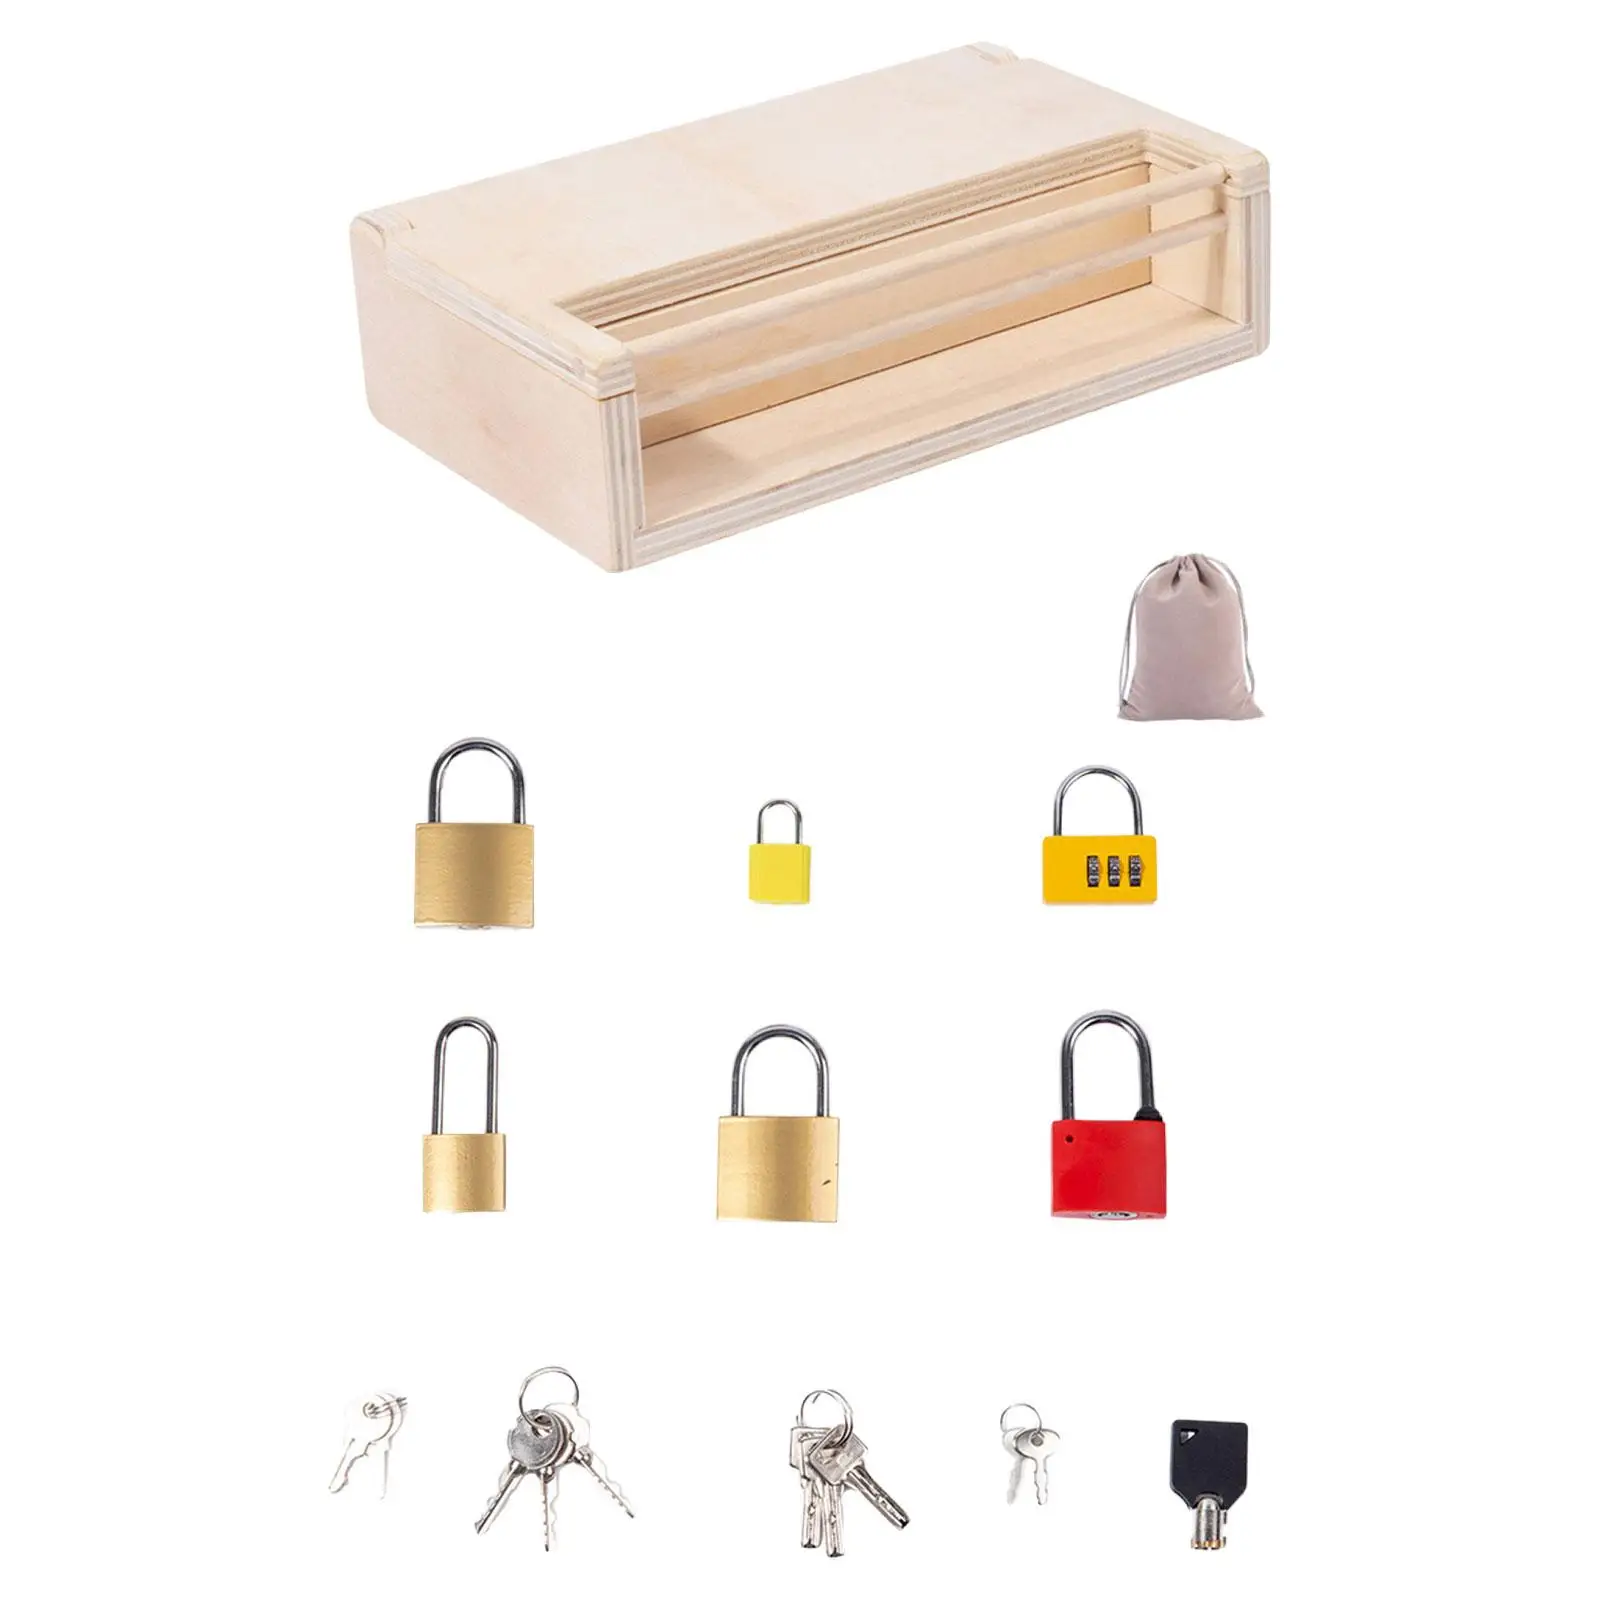 Matching Lock Toys Early Education Color Recognition Wooden Unlocking Box Educational Lock Set Keys for Boys Holiday Gifts